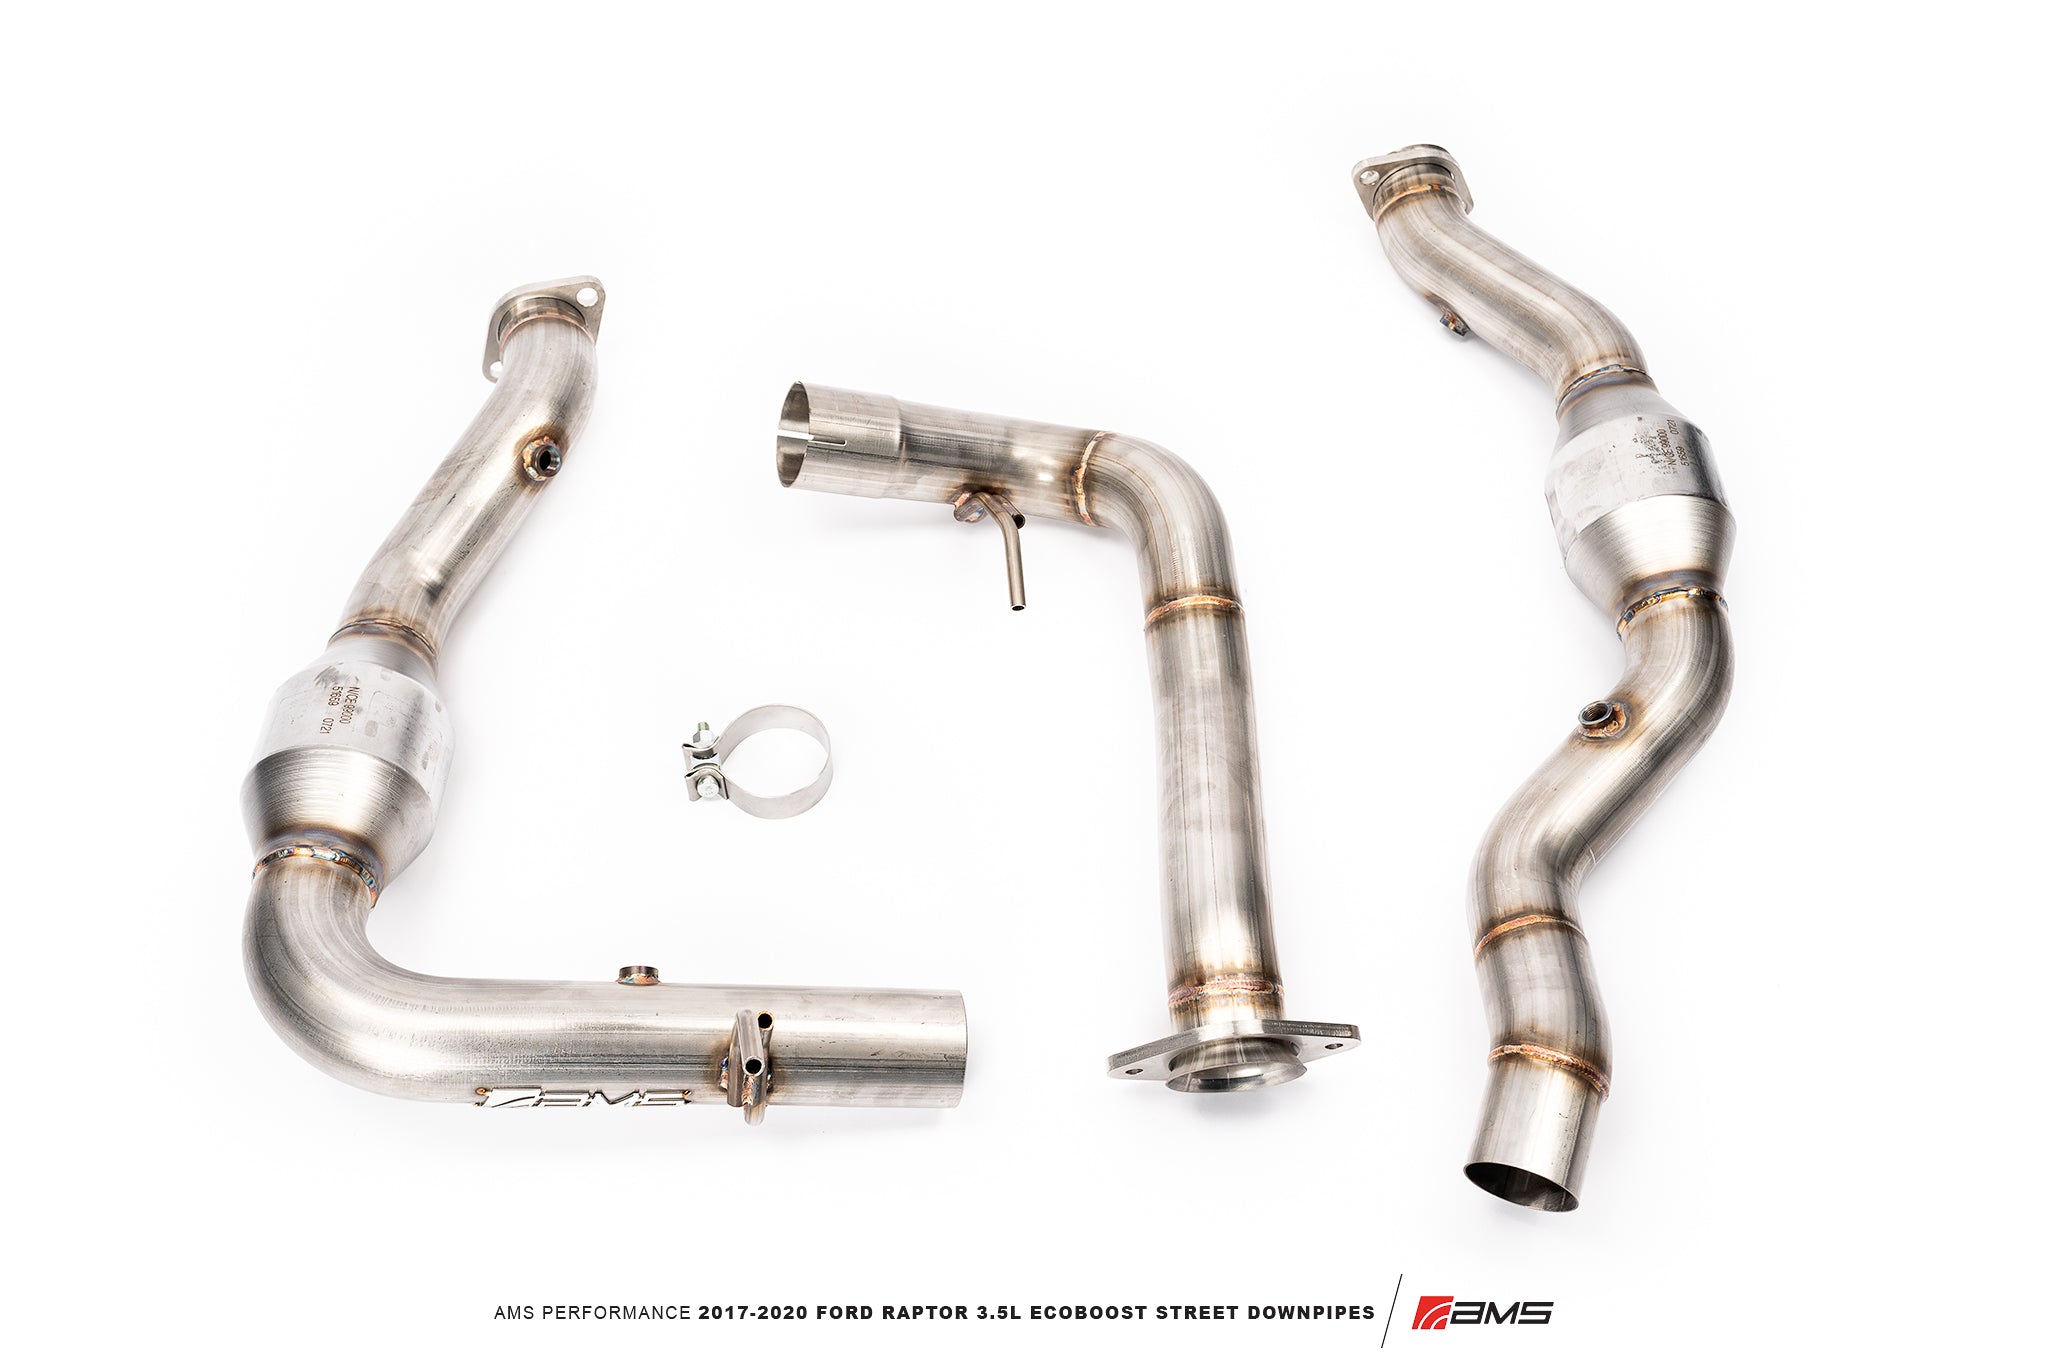 '17-20 Ford Raptor 3.5L Ecoboost Street Downpipes AMS parts